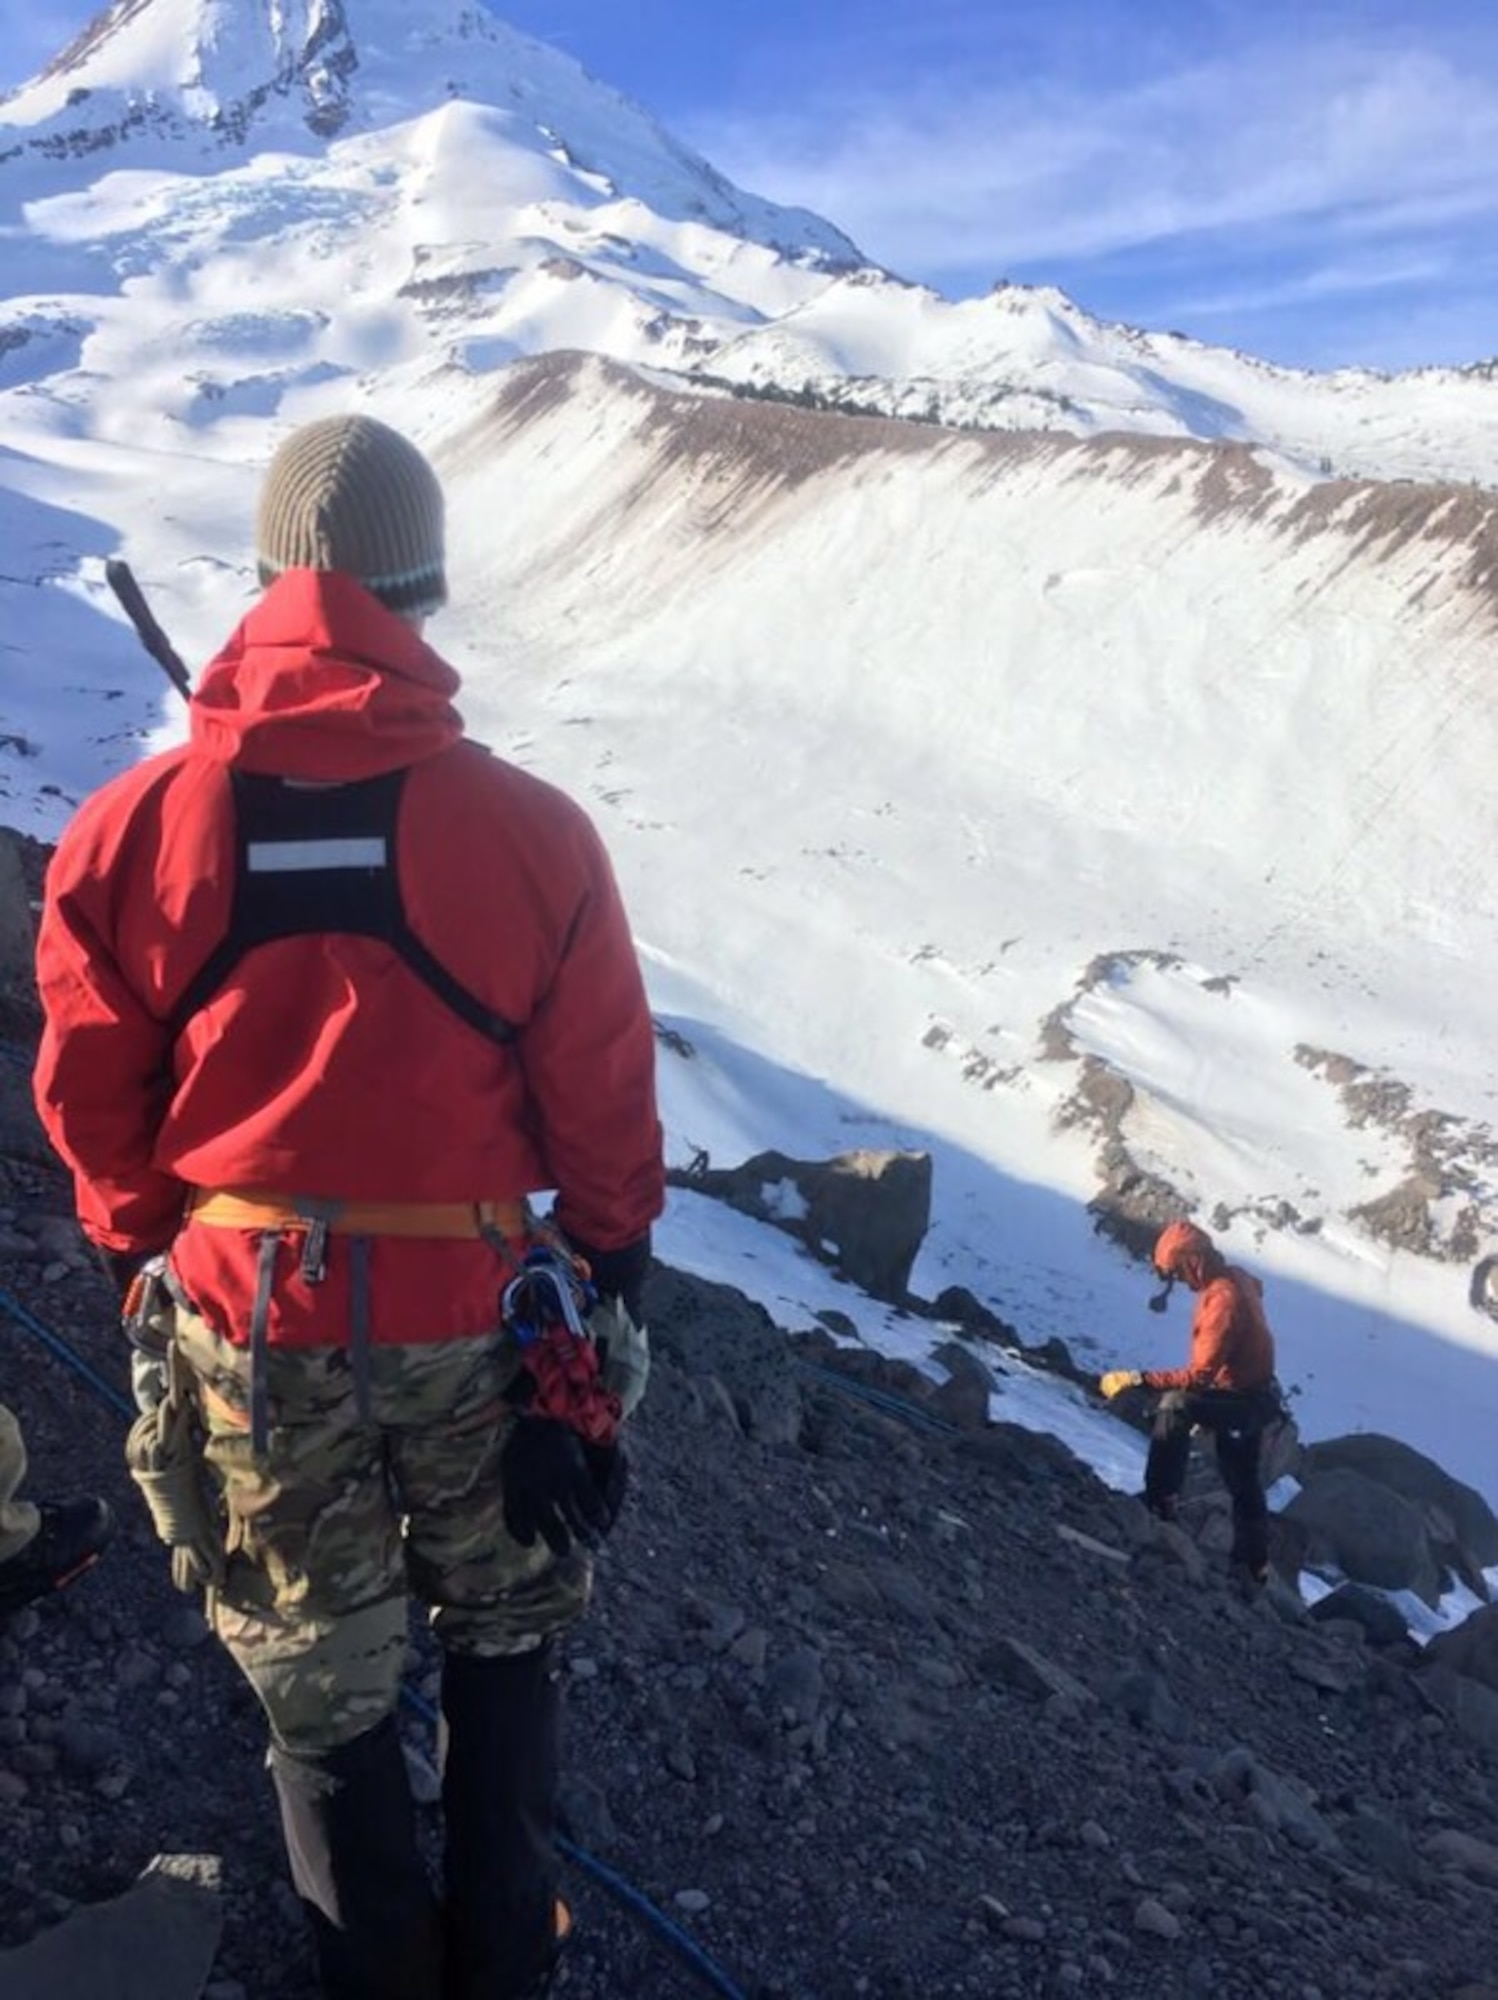 Members of the 304th Rescue Squadron, Air Force Reserves, participate in a civilian search and rescue mission with local agencies on Mt. Hood, Jan. 30th 2019.